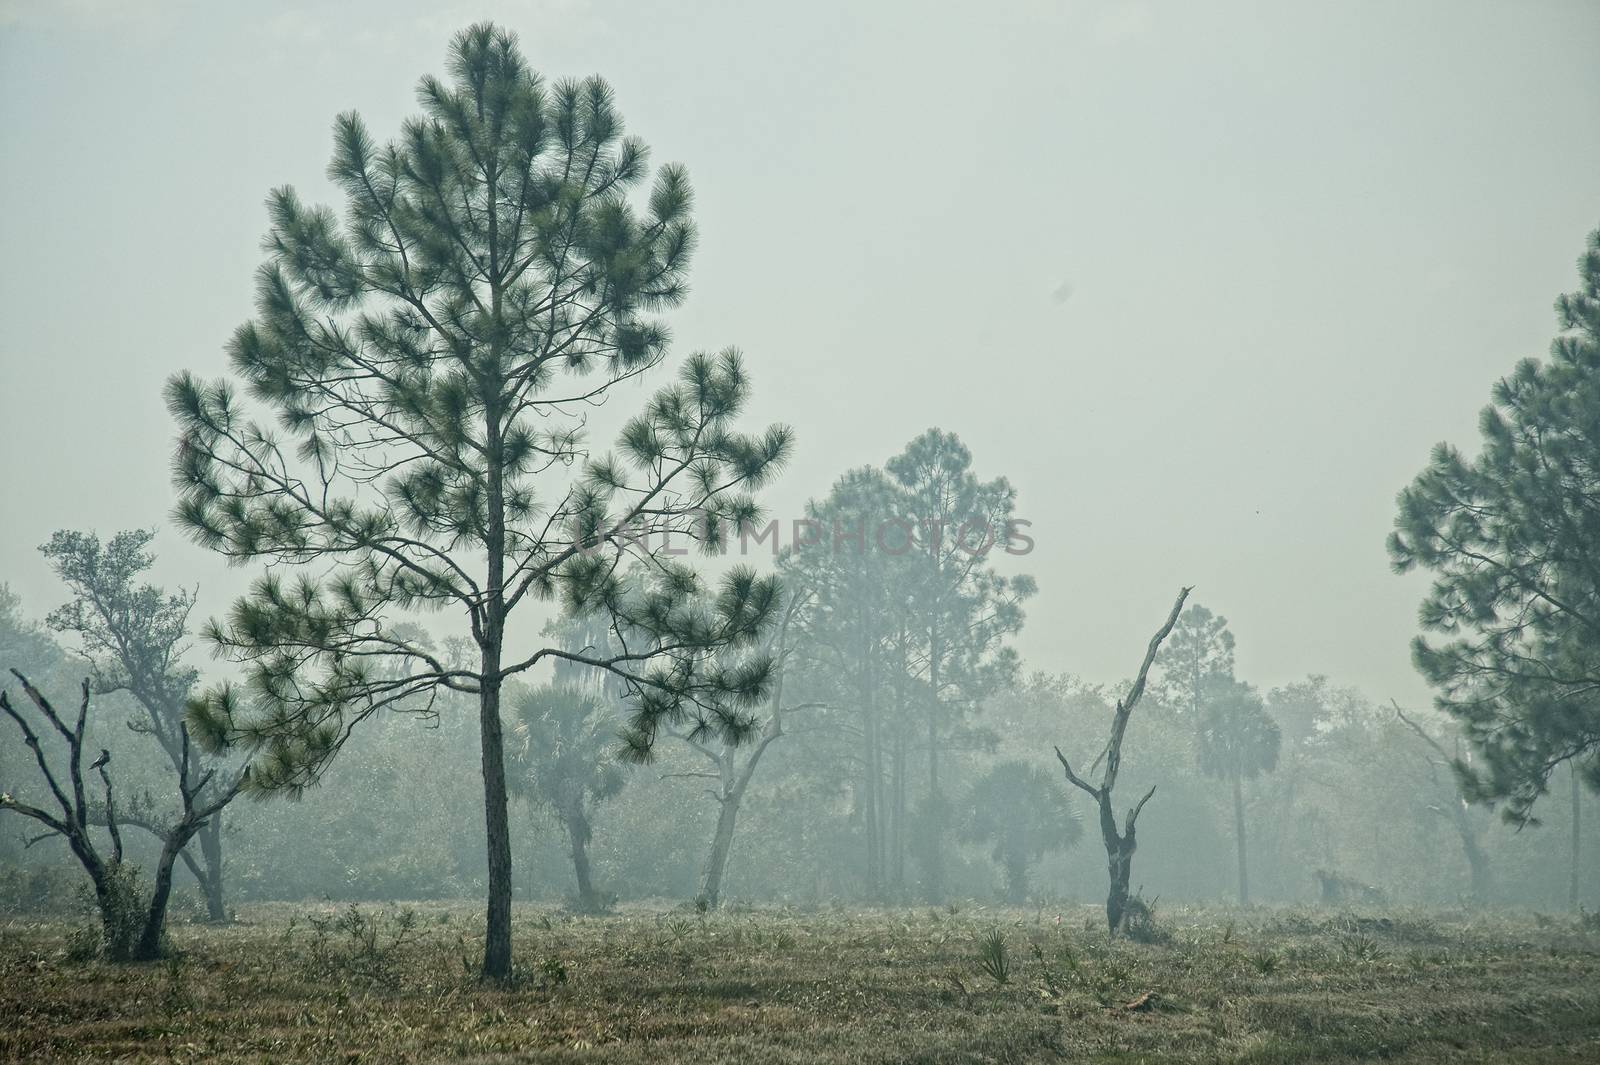 Florida Pines in Smoke During Controlled Burn  by Charidy